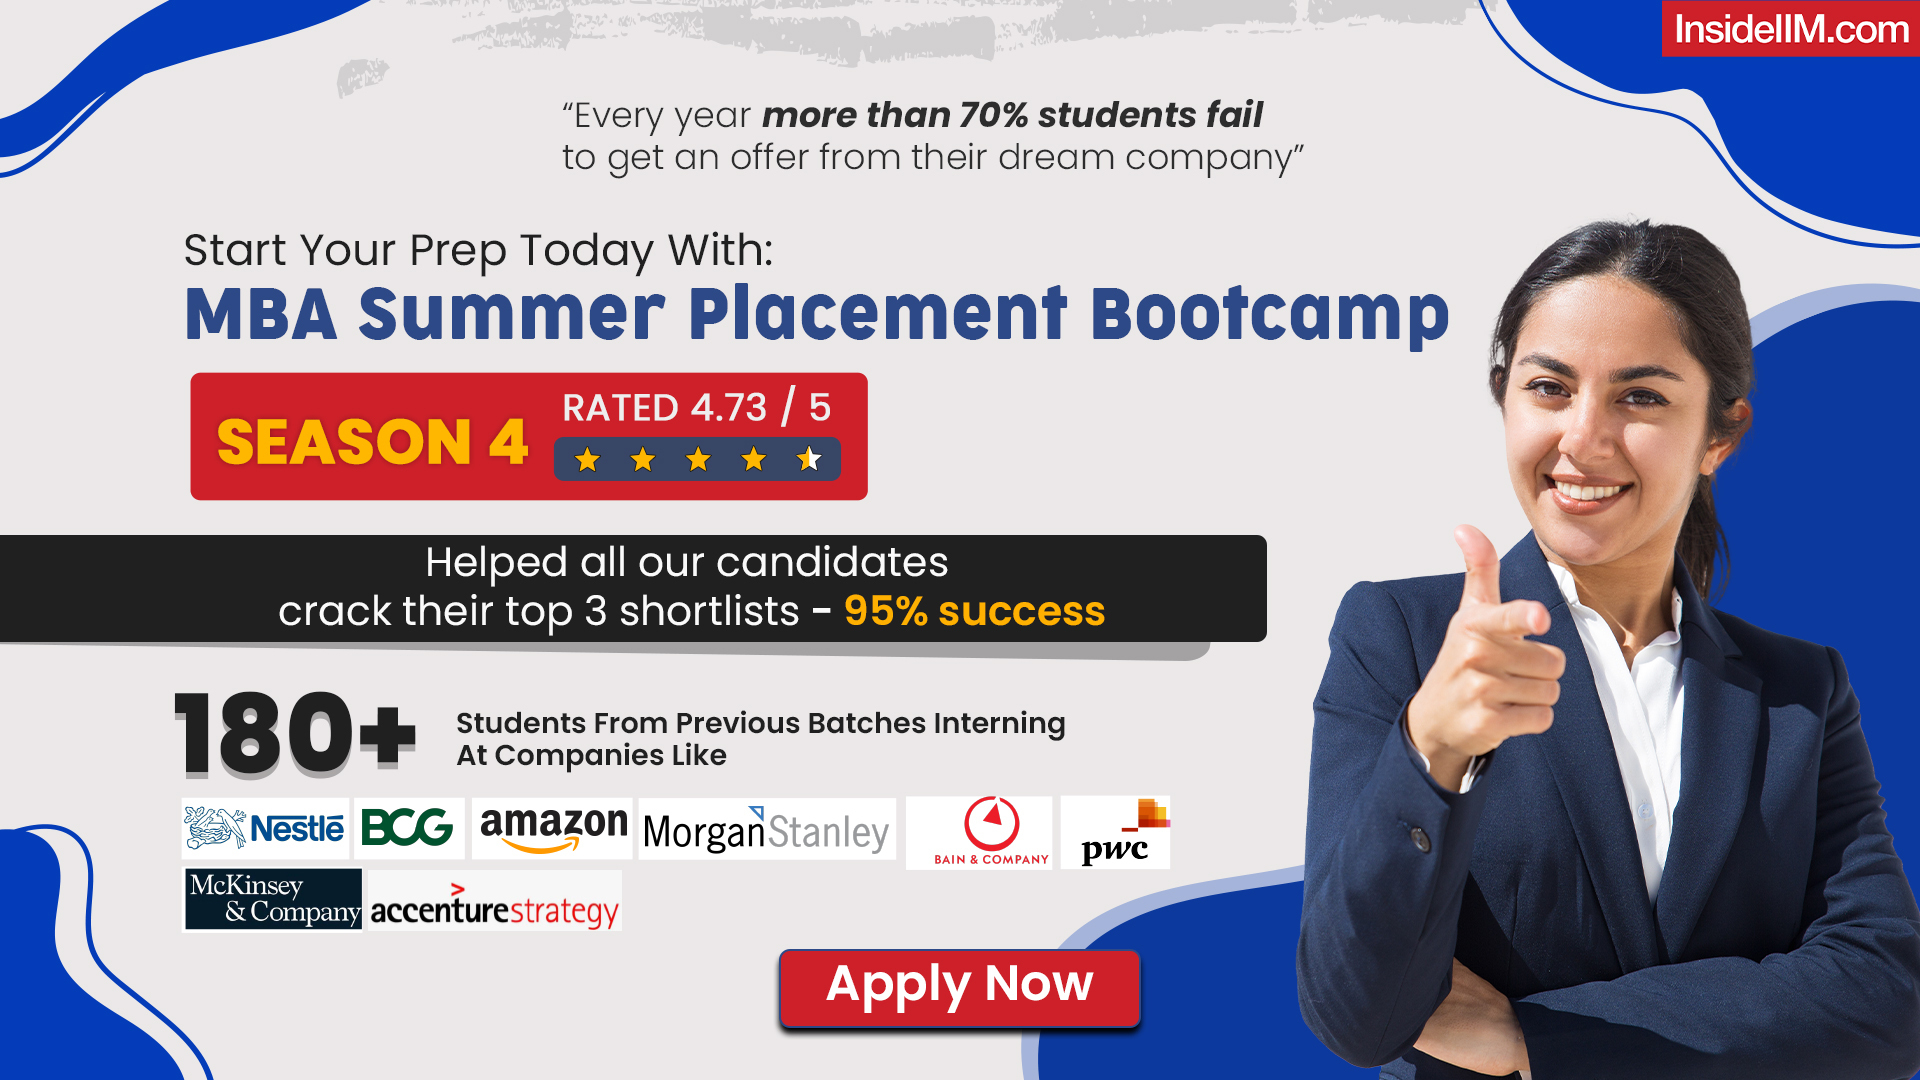 Ace Your Summer Placements With MBA Placements Bootcamp - Day Zero S04!